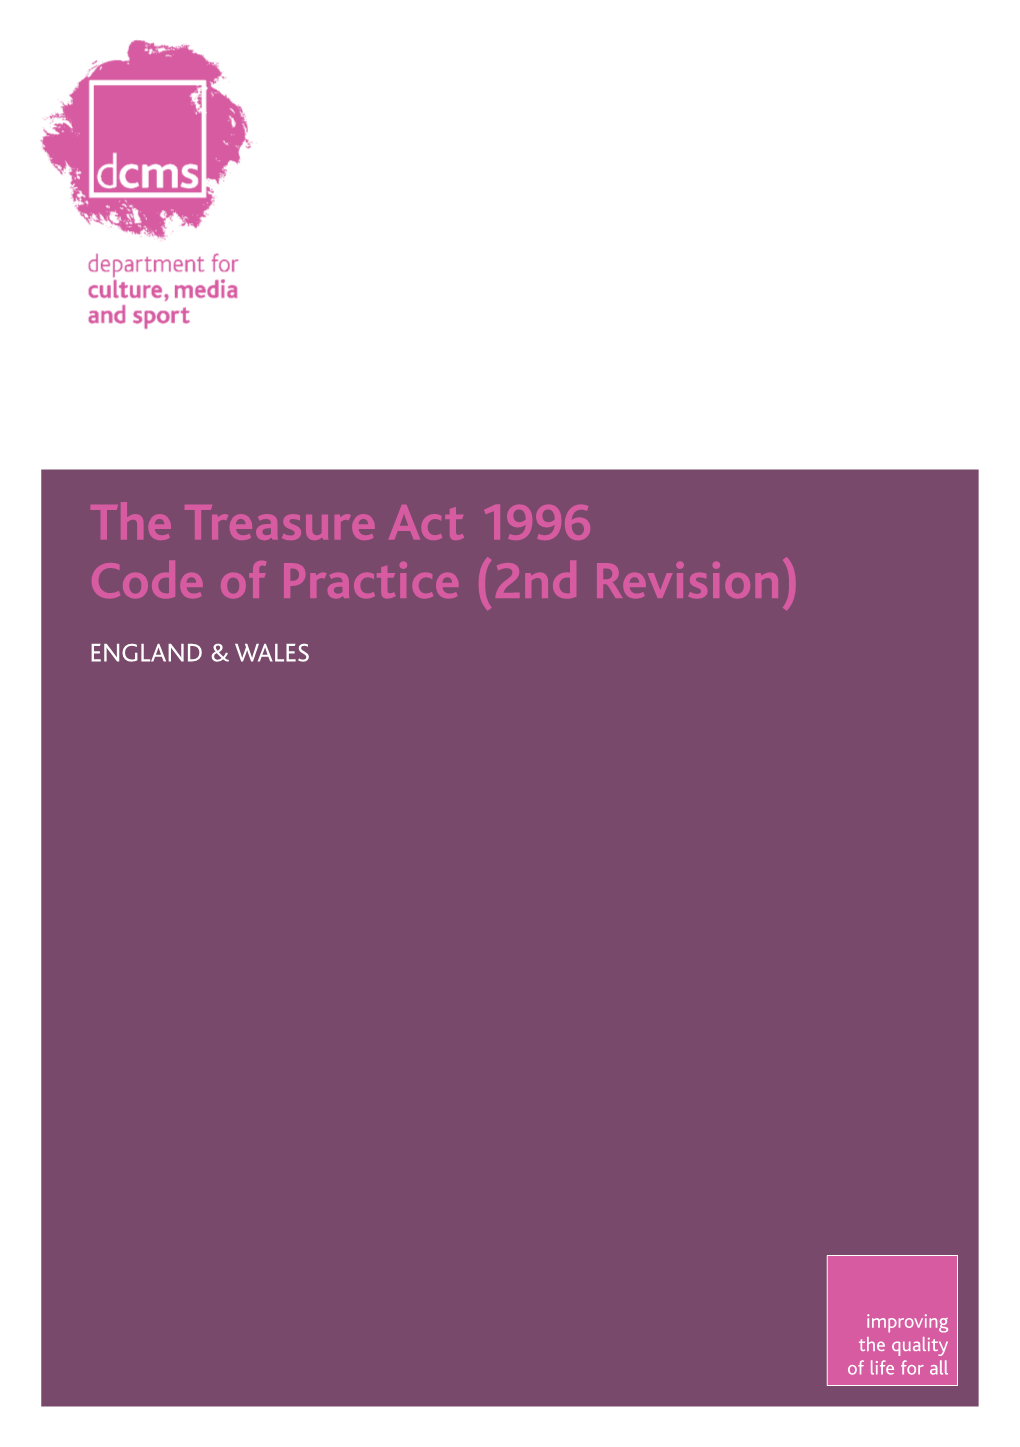 The Treasure Act 1996 Code of Practice (2Nd Revision)